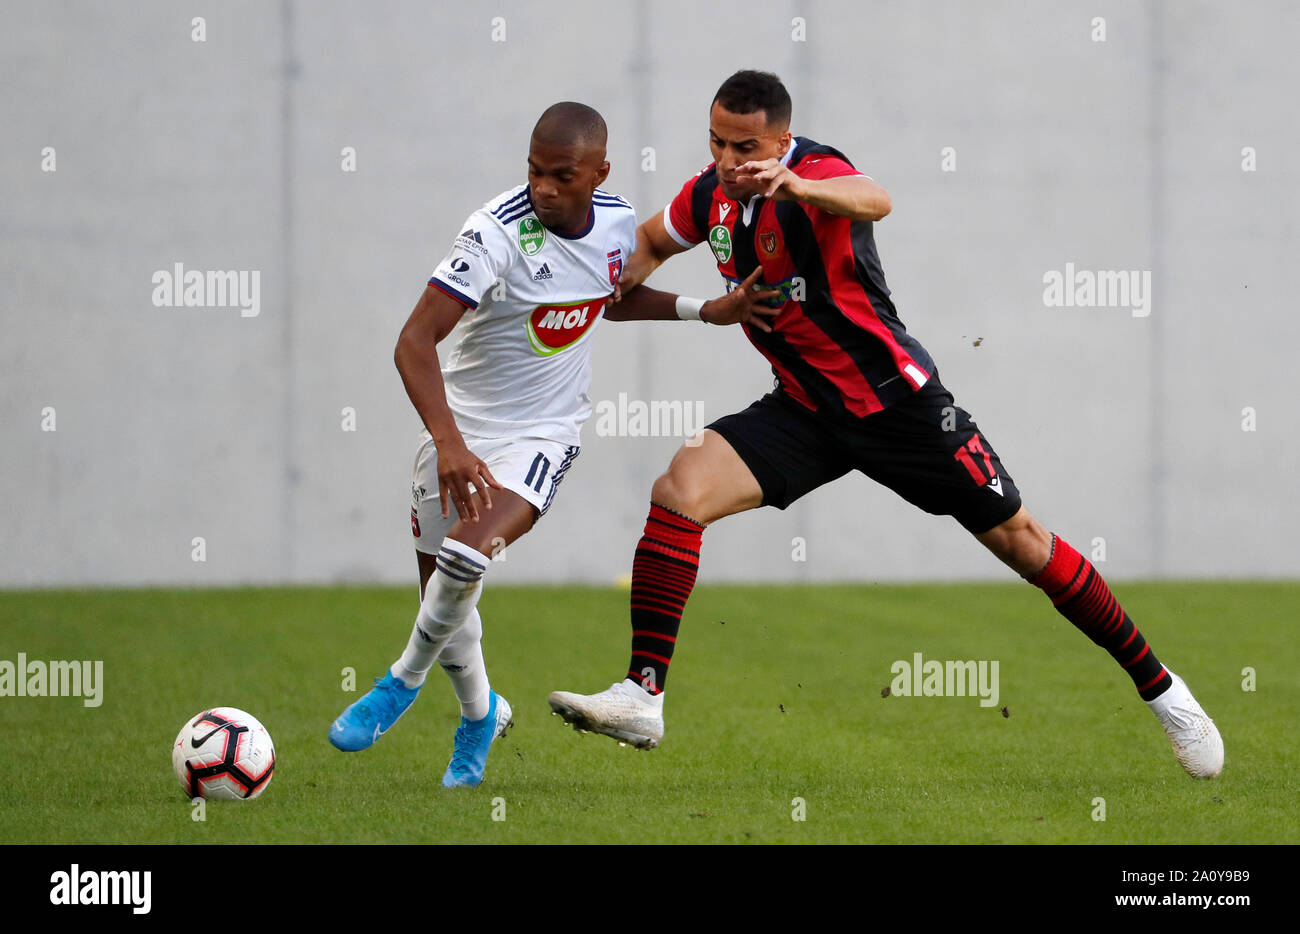 BUDAPEST, HUNGARY - SEPTEMBER 14: (l-r) Loic Nego of MOL Fehervar FC fights for the ball with Anis Ben-Hatira of Budapest Honved during the Hungarian OTP Bank Liga match between Budapest Honved and MOL Fehervar FC at Nandor Hidegkuti Stadium on September 14, 2019 in Budapest, Hungary. Stock Photo